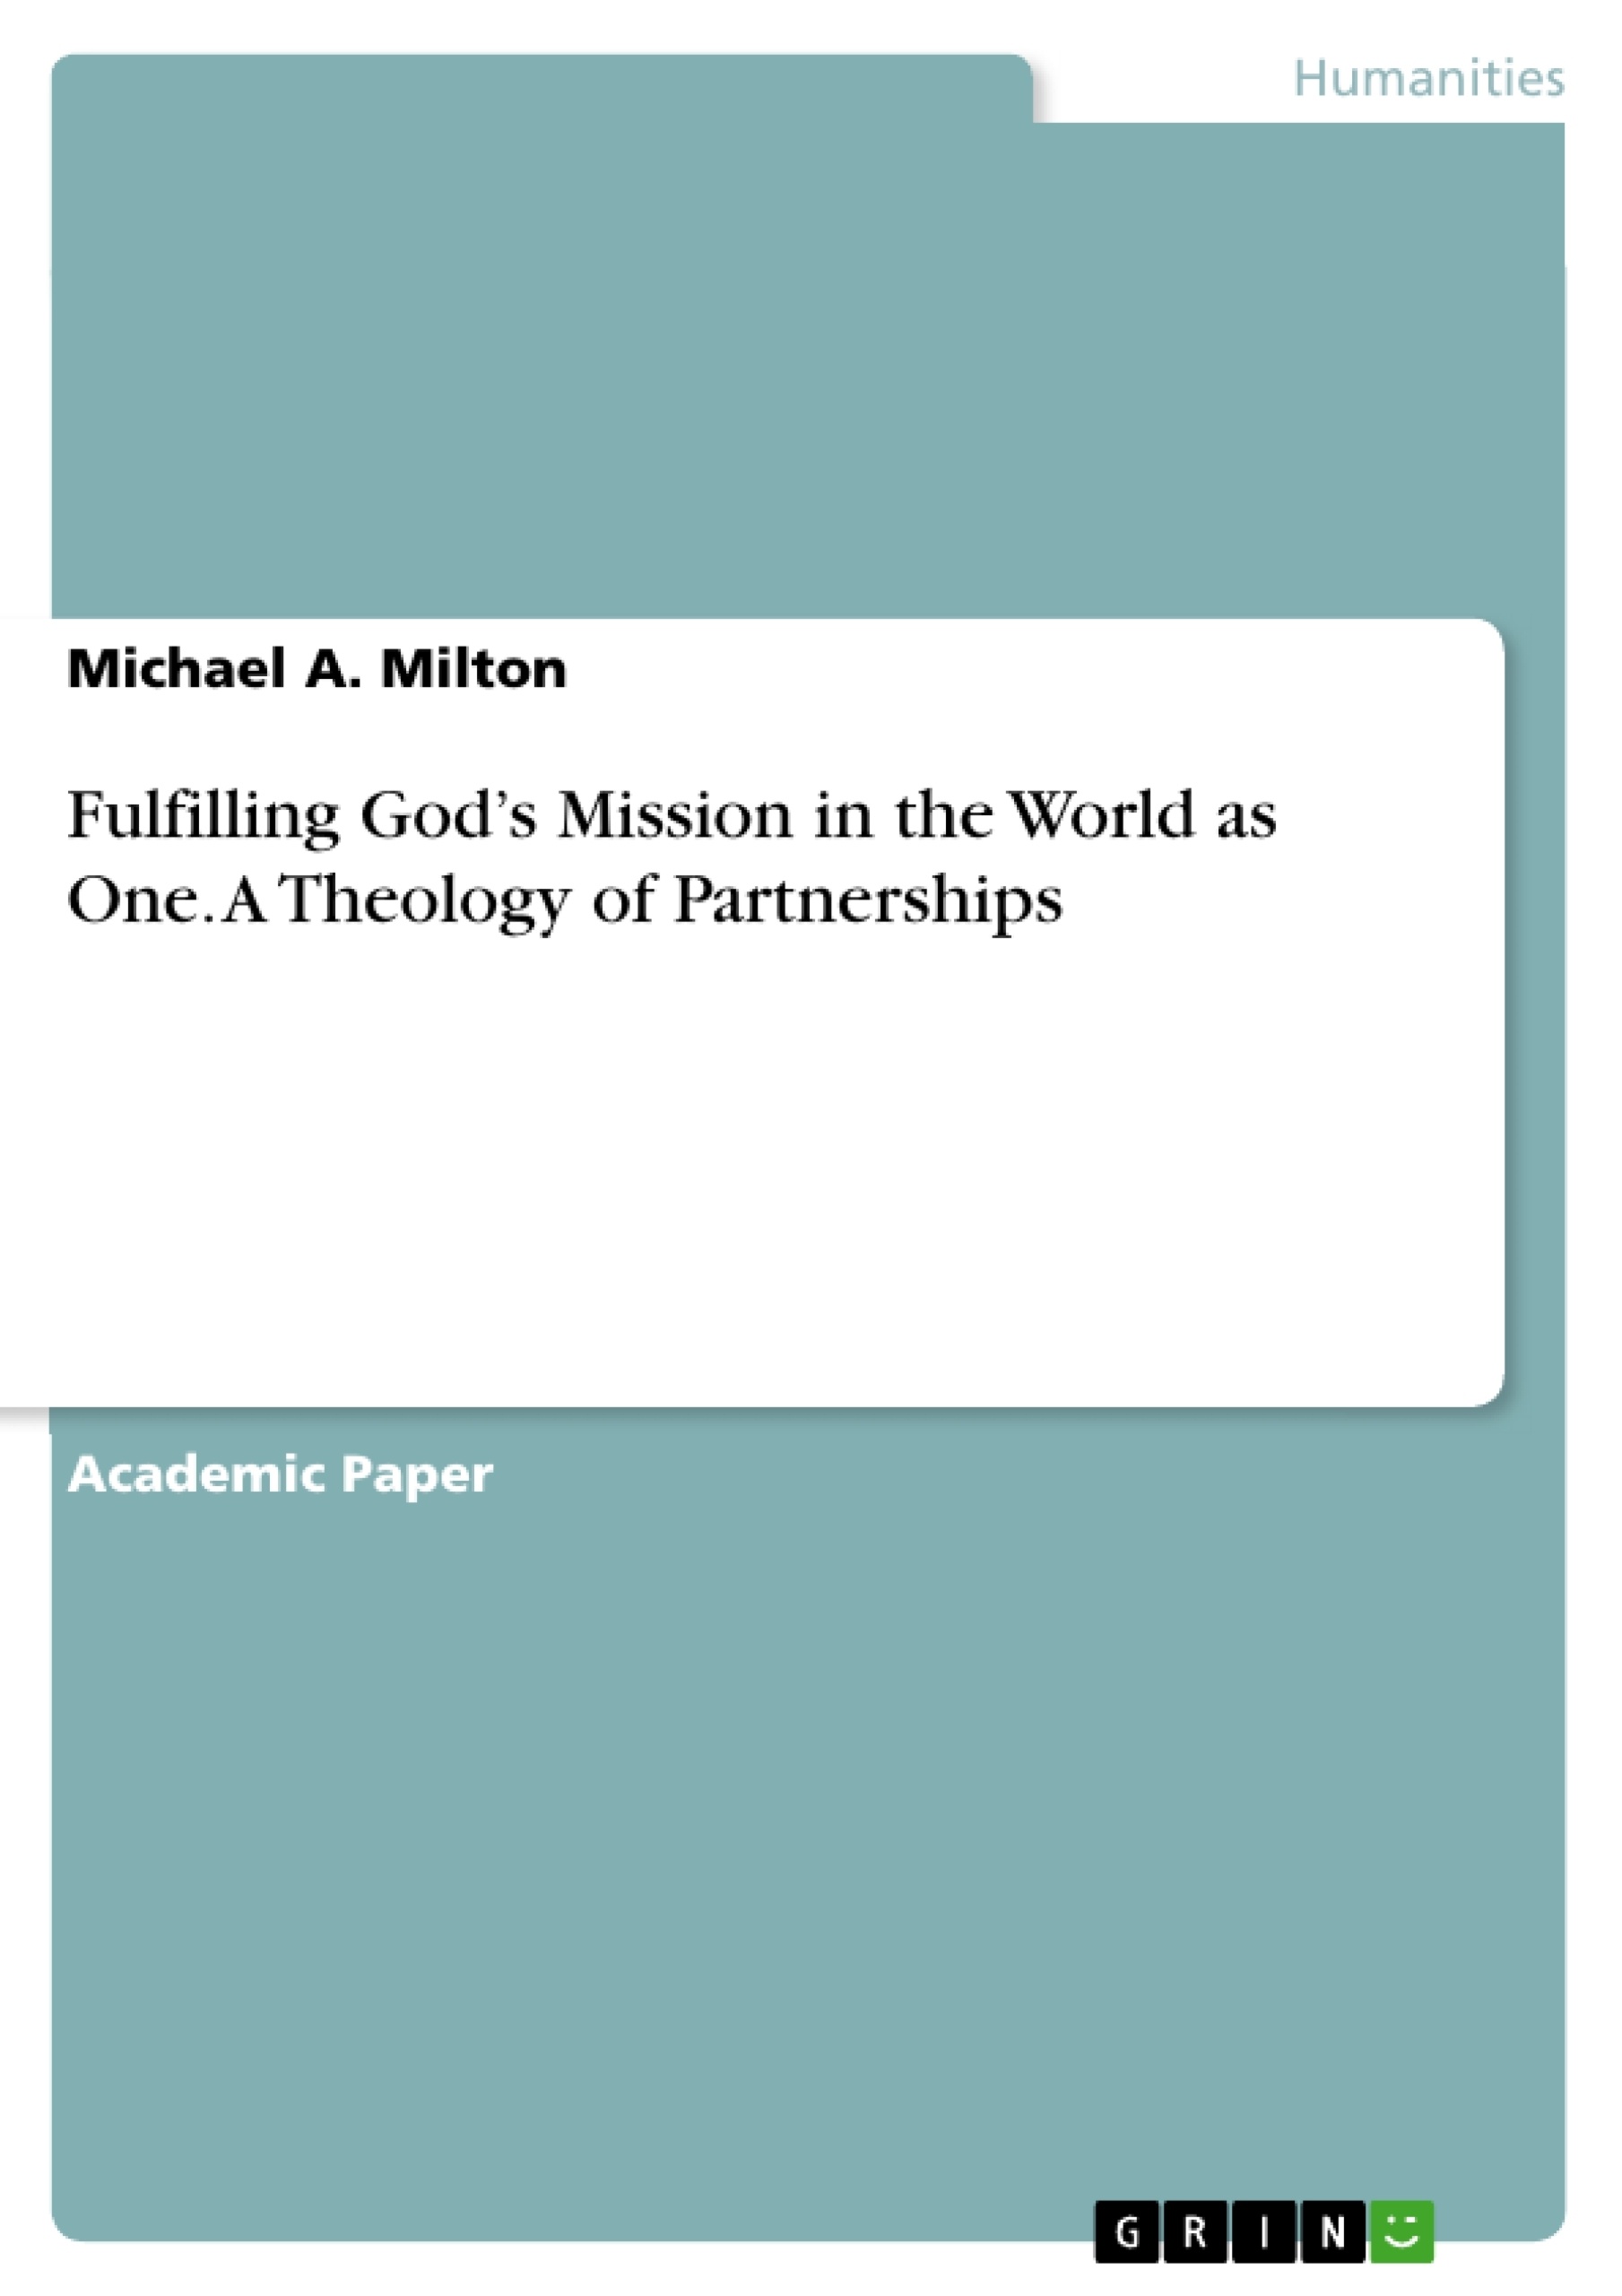 Título: Fulfilling God’s Mission in the World as One. A Theology of Partnerships